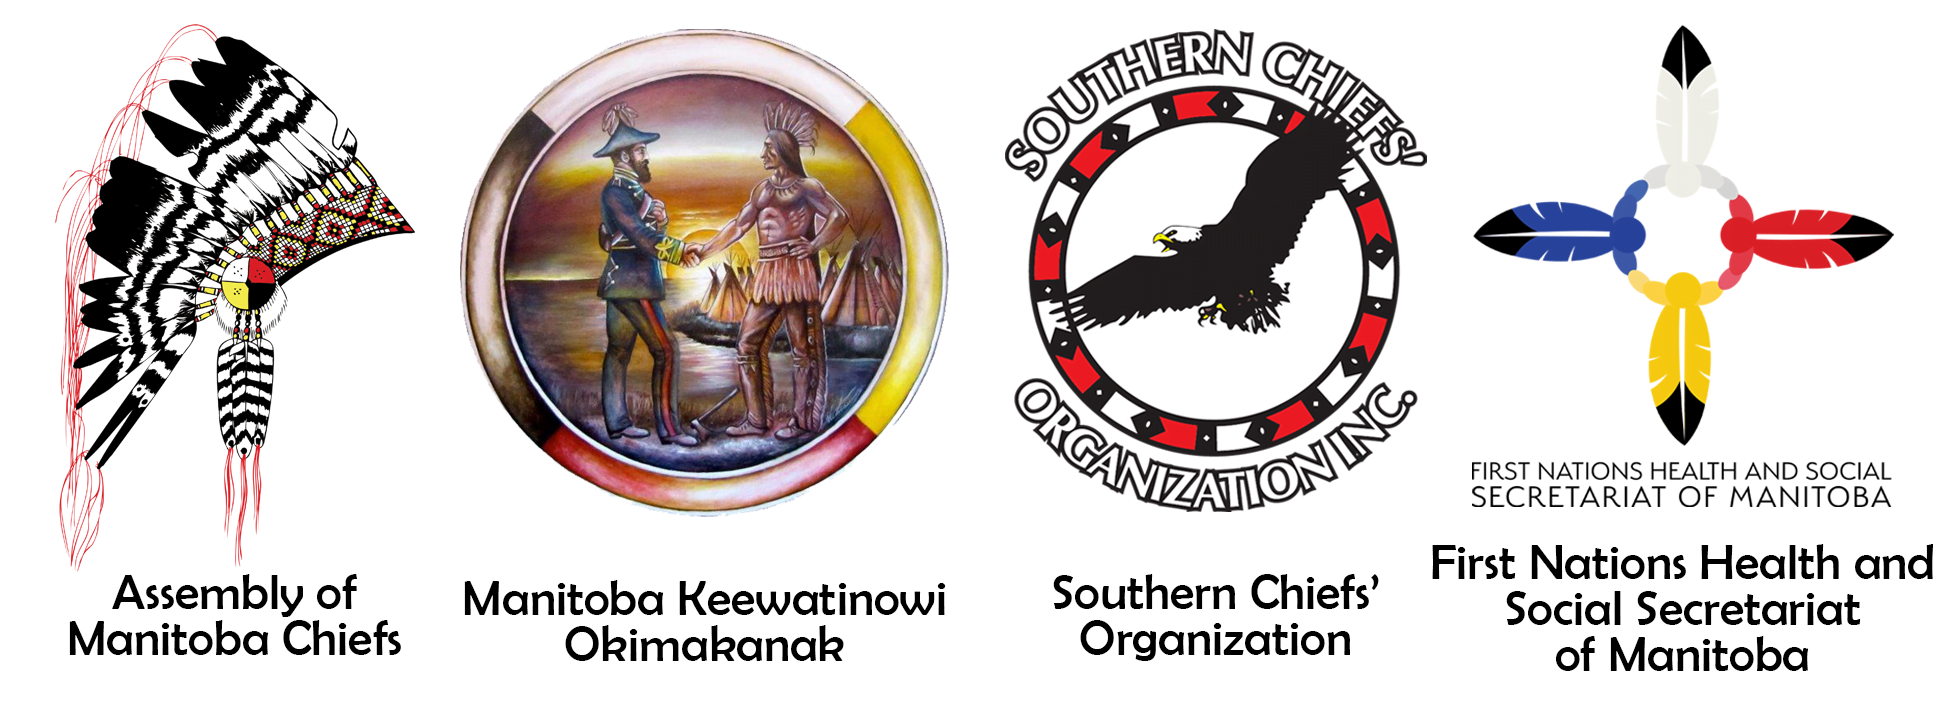 A potent symbol of First Nations rights sat for years in DFO storage, but  now it's home